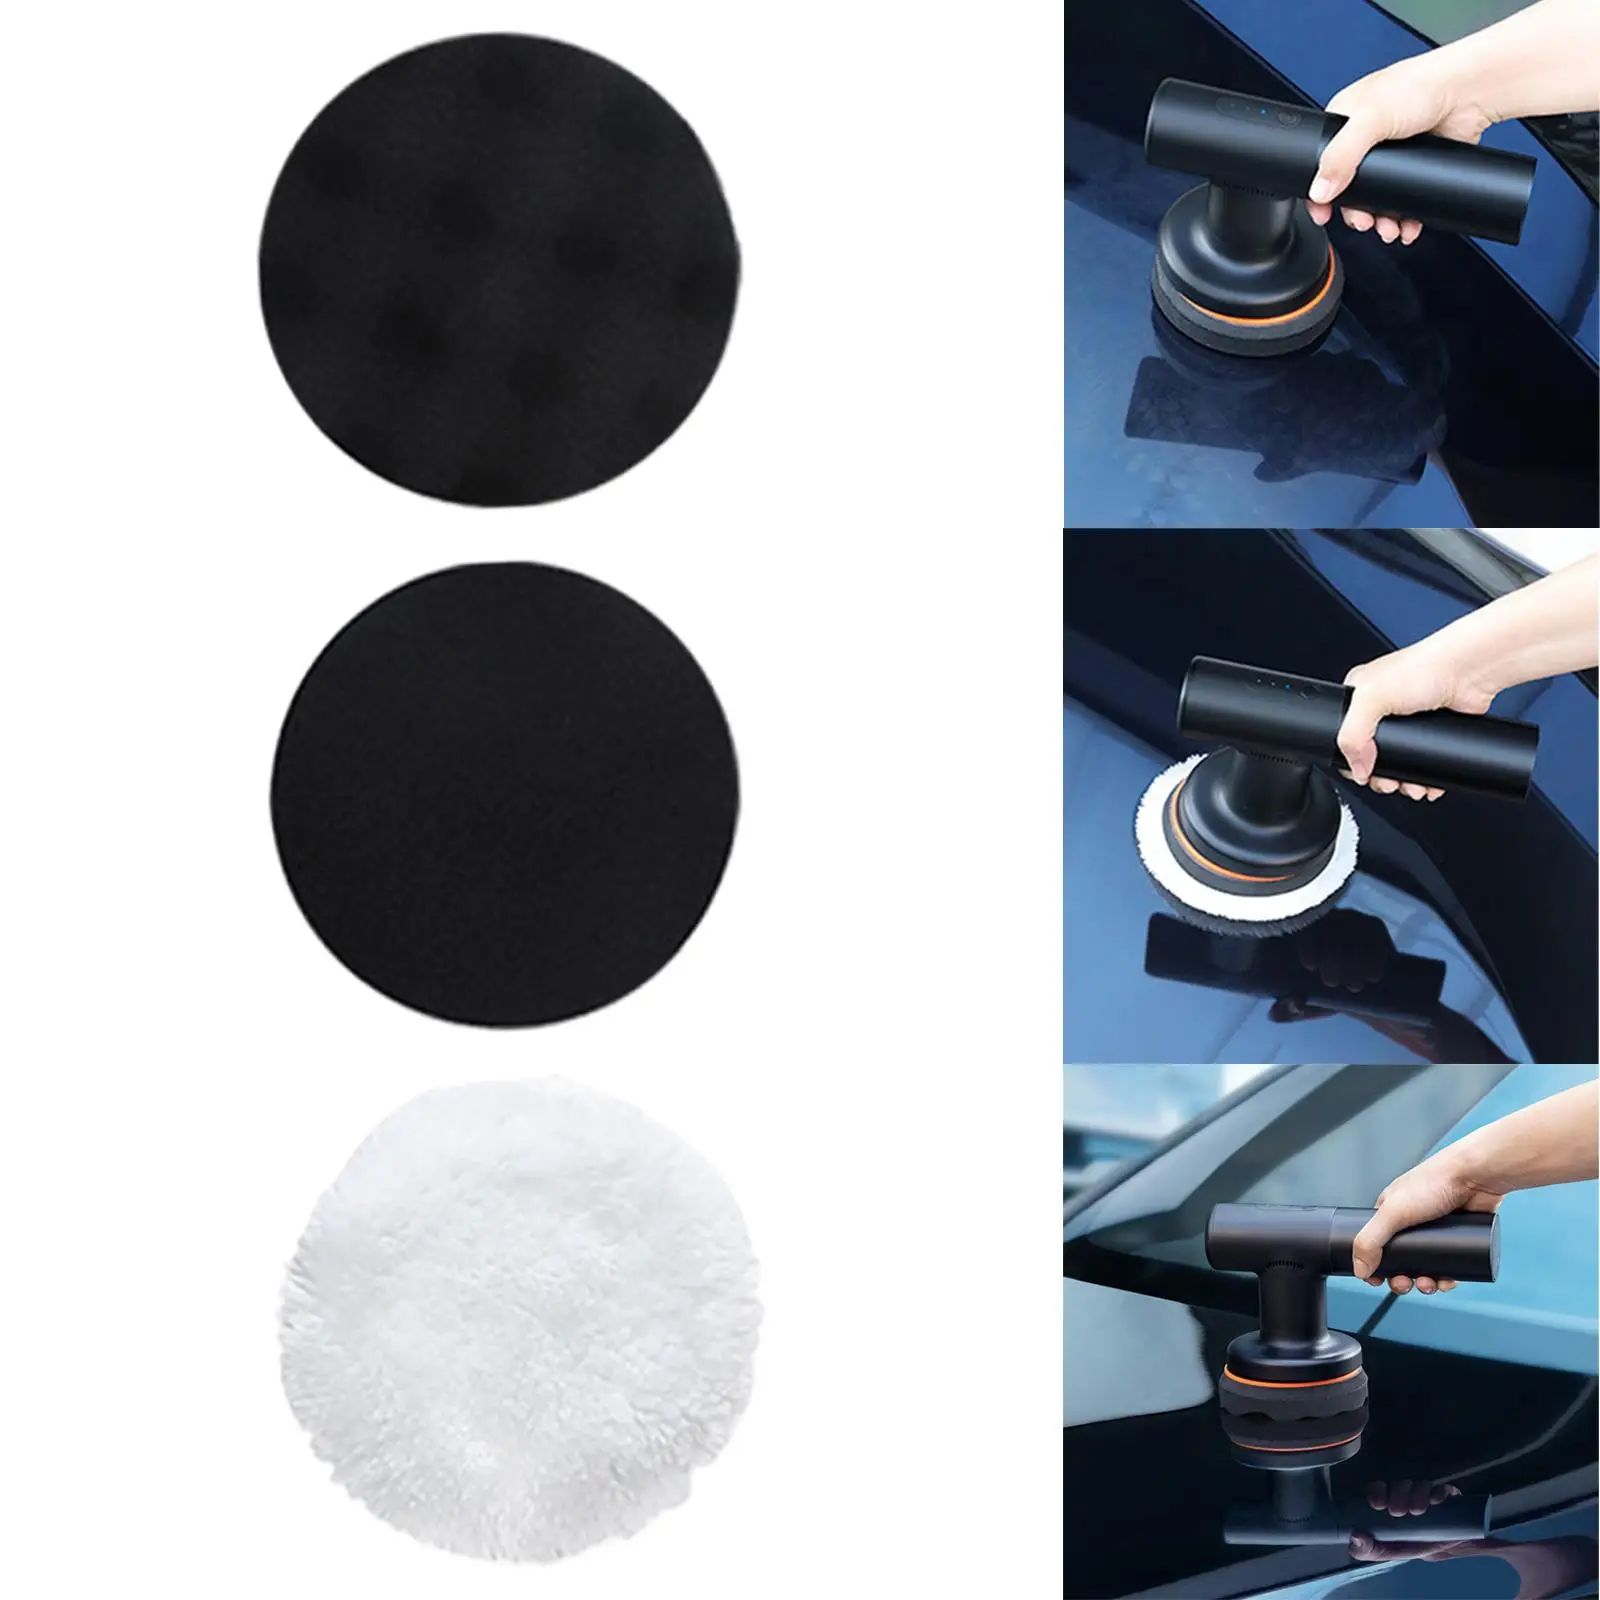 Polishing Pads Kit 3Pcs Waxing Evenly Clean Polish Professional Polisher for Car